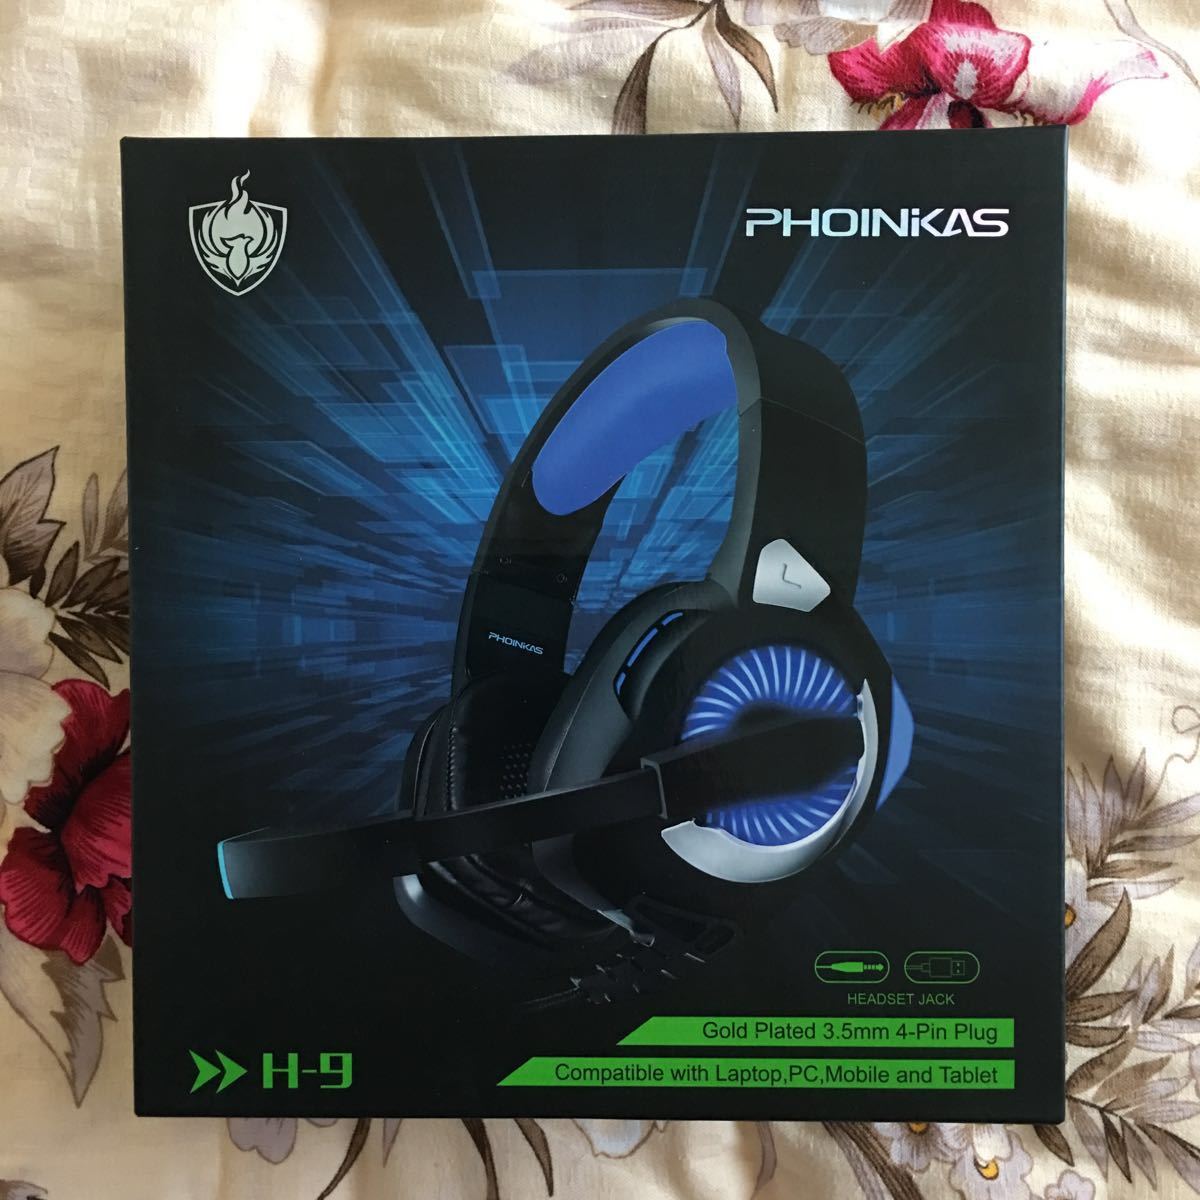  regular price 4980 jpy large price decline middle ge-ming headset [2018 newest improvement version ] headphone height compilation sound . Mike attaching game for deep bass strengthen 3.5mm most height sound quality 